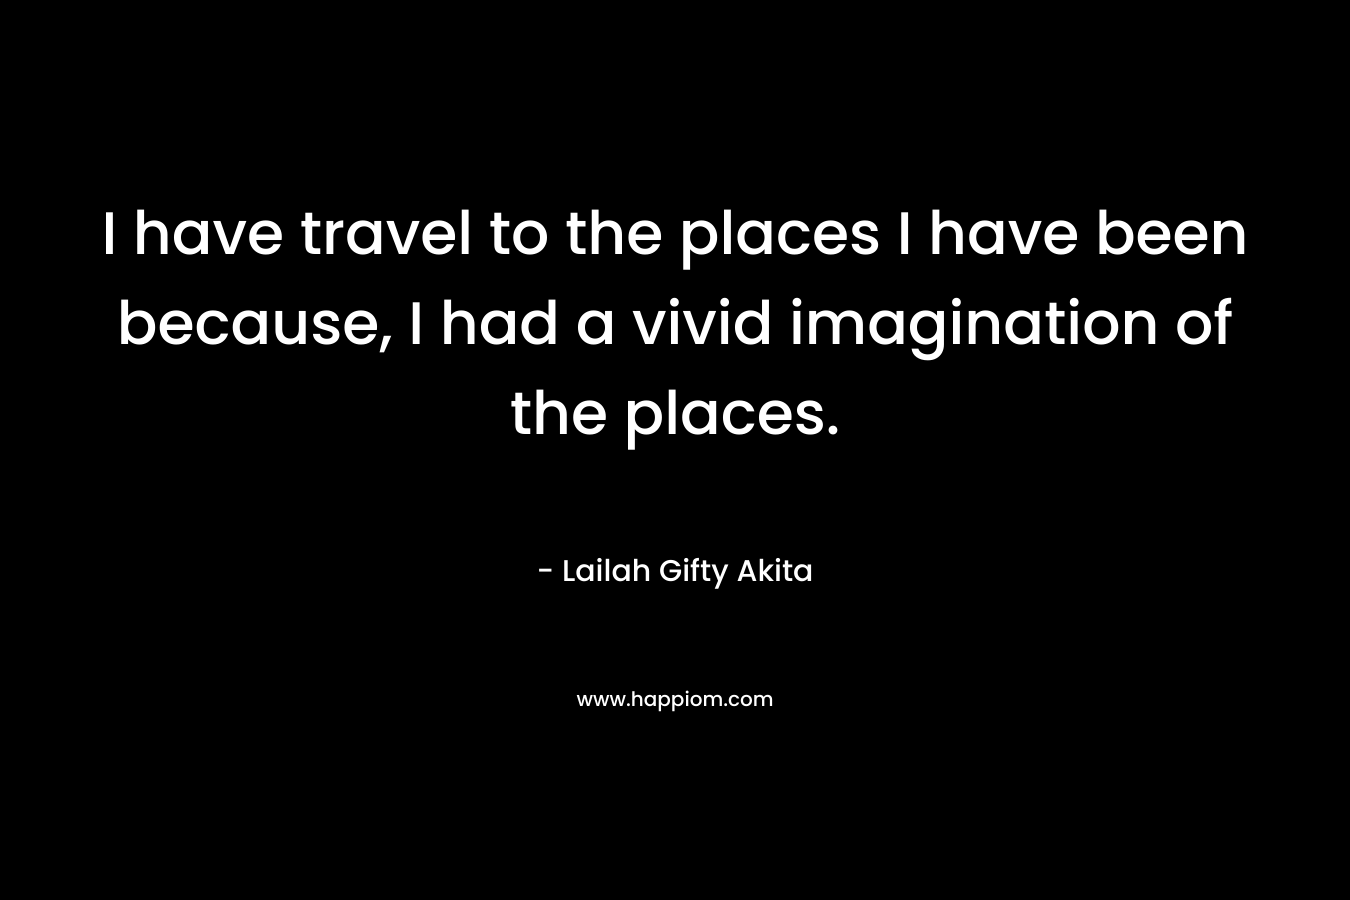 I have travel to the places I have been because, I had a vivid imagination of the places. – Lailah Gifty Akita